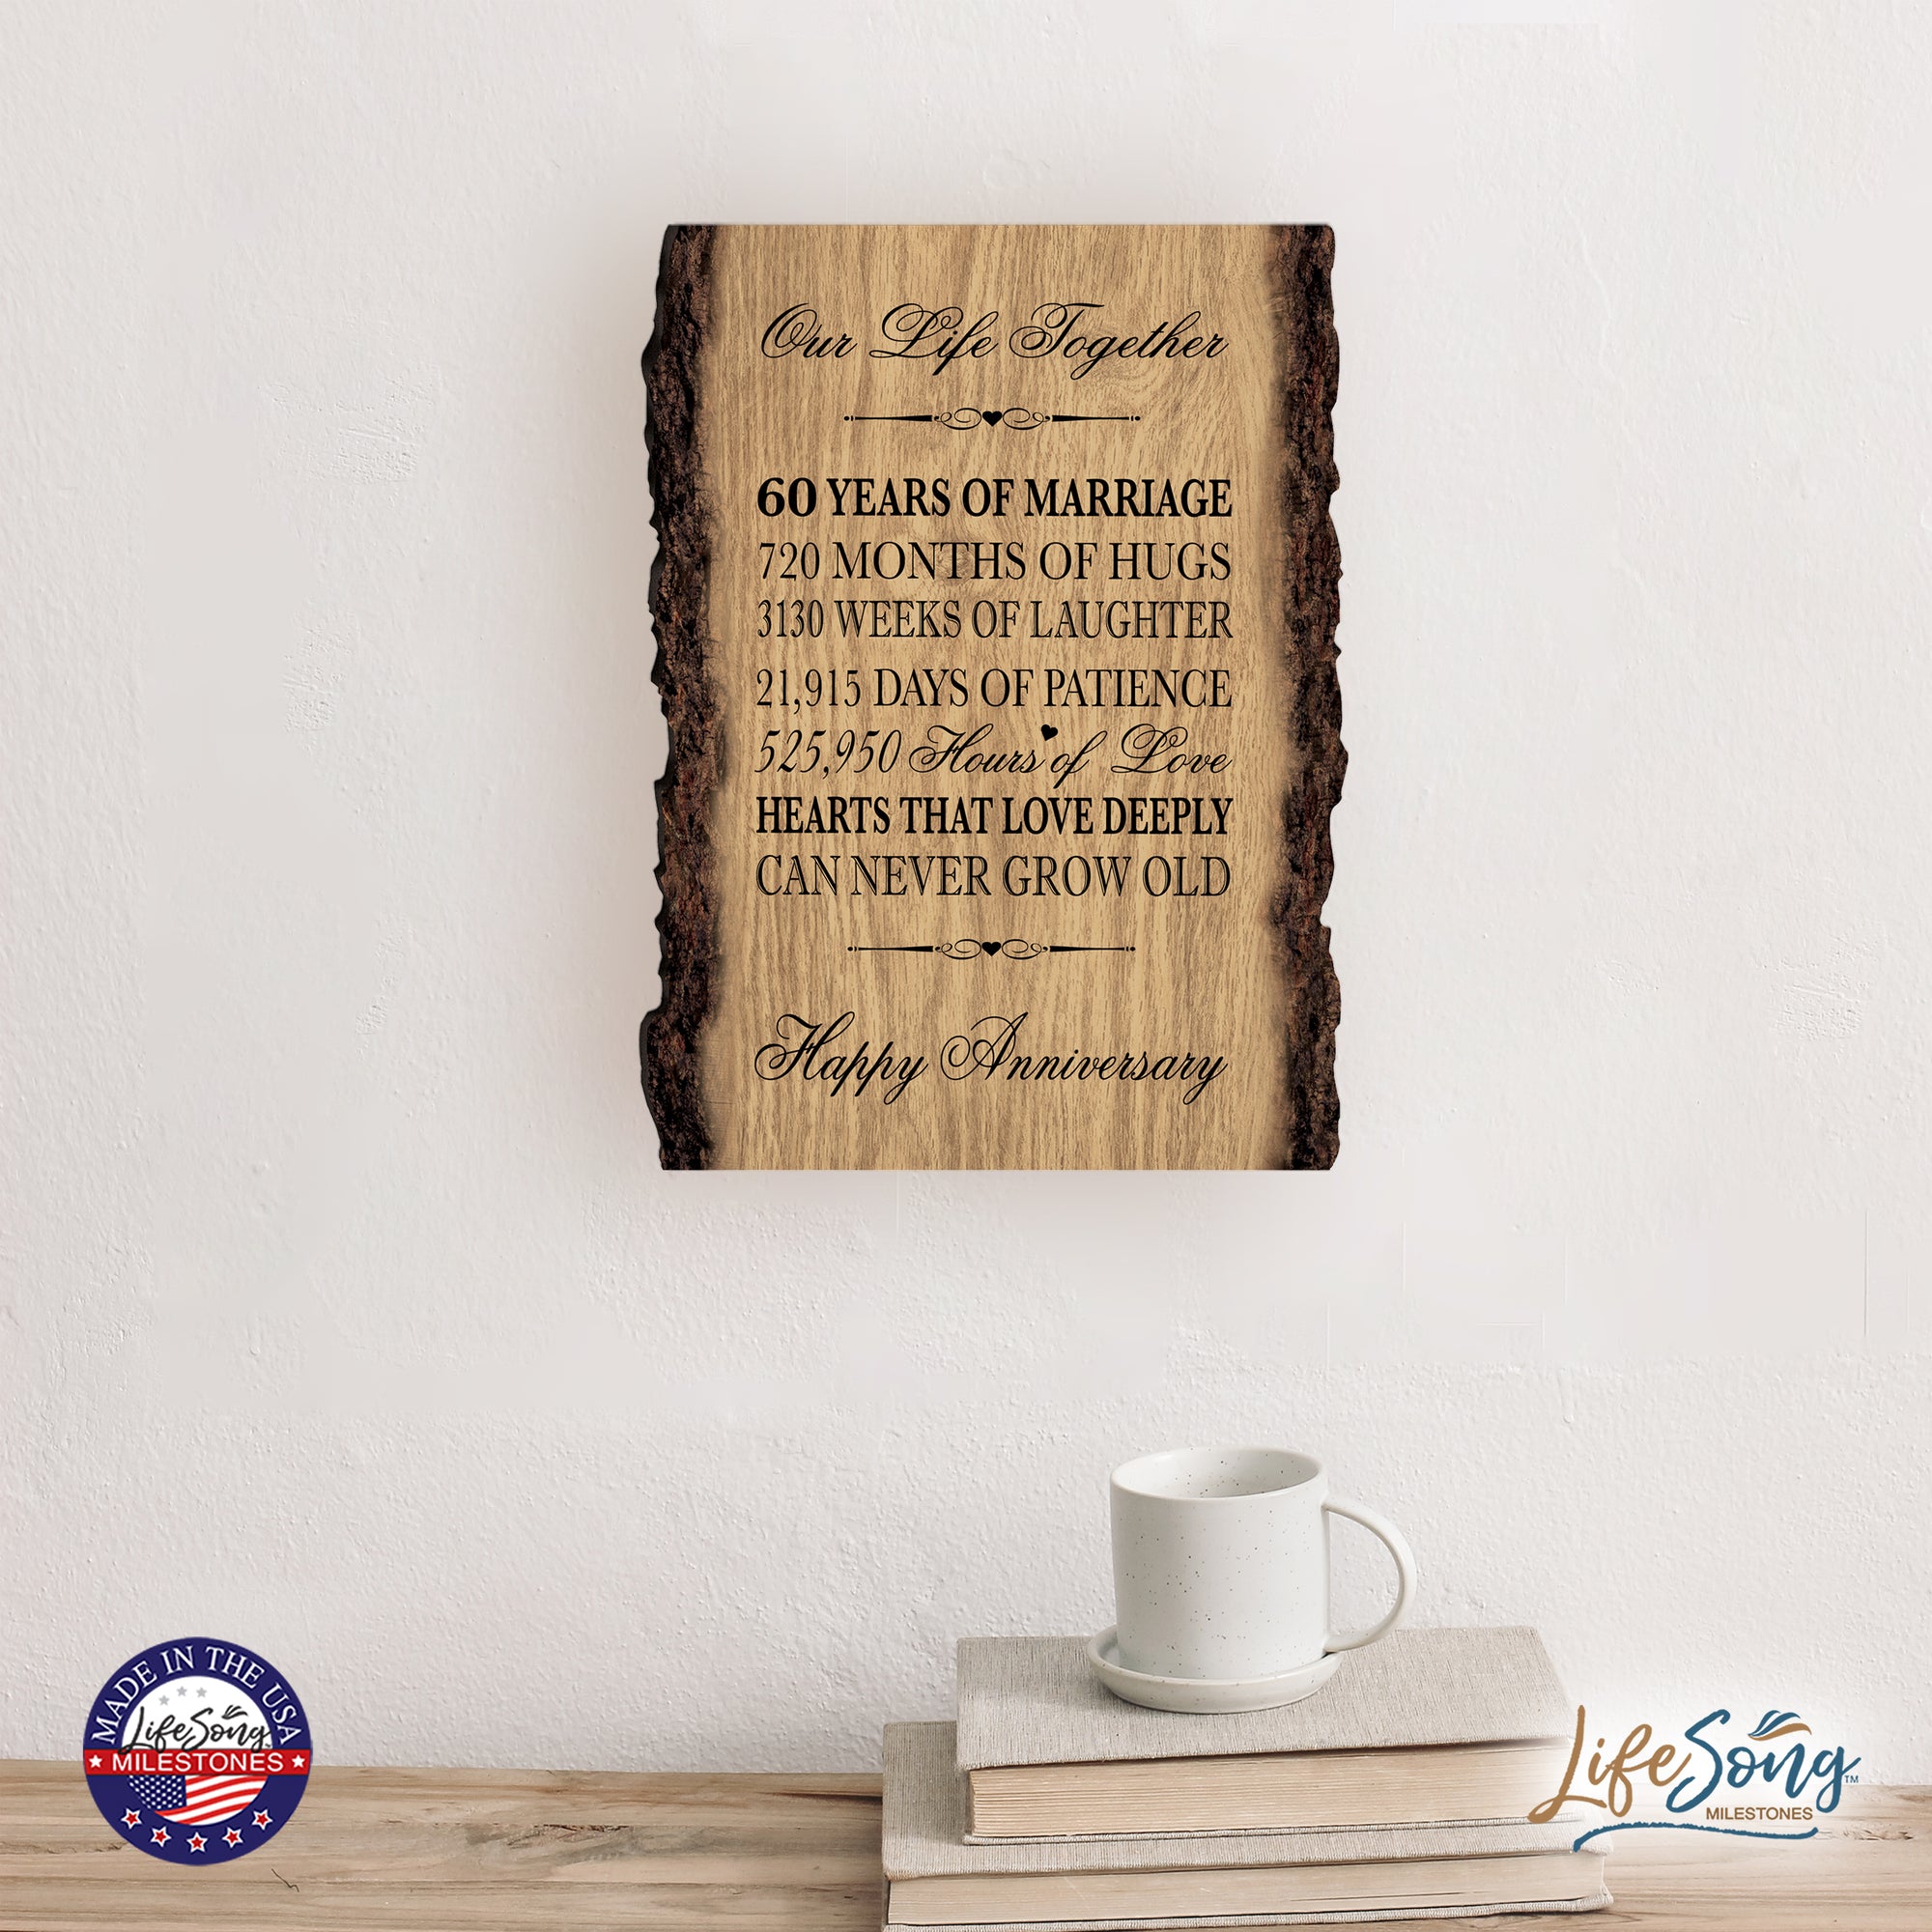 Rustic Wedding Anniversary 9x12 Barky Wall Plaque Gift For Parents, Grandparents New Couple - 60 Years Of Marriage